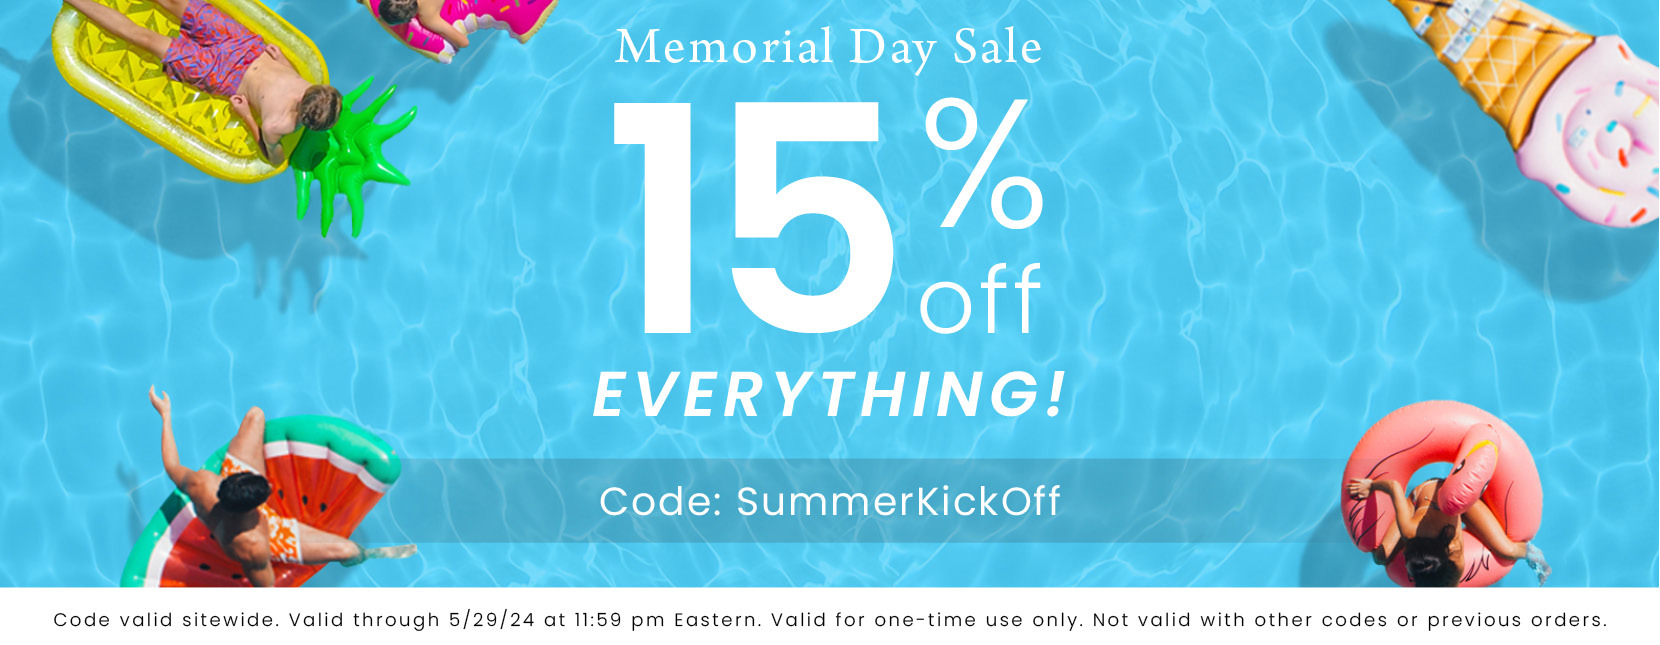 Memorial Day Sale - 15% off everything! Code: SummerKickOff